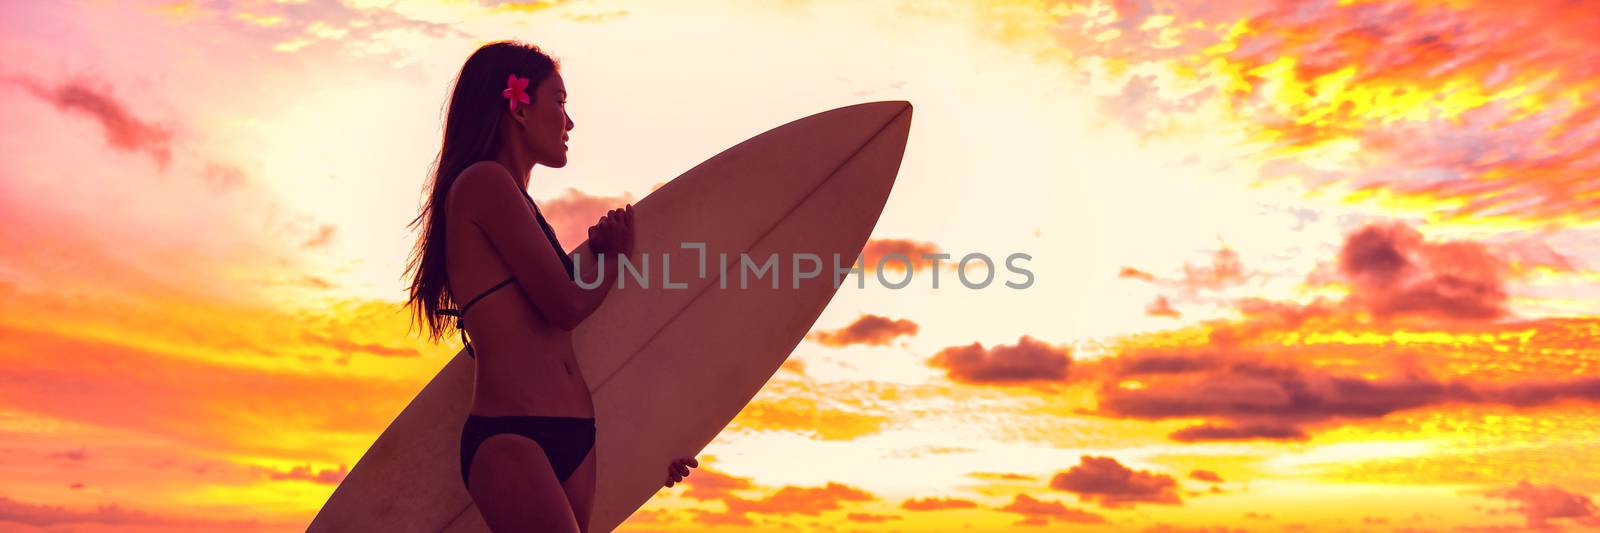 Surfer bikini girl on Hawaii beach holding surf board watching ocean waves at sunset. Silhouette of Asian sport woman over landscape, sky and clouds background. Summer vacation lifestyle by Maridav